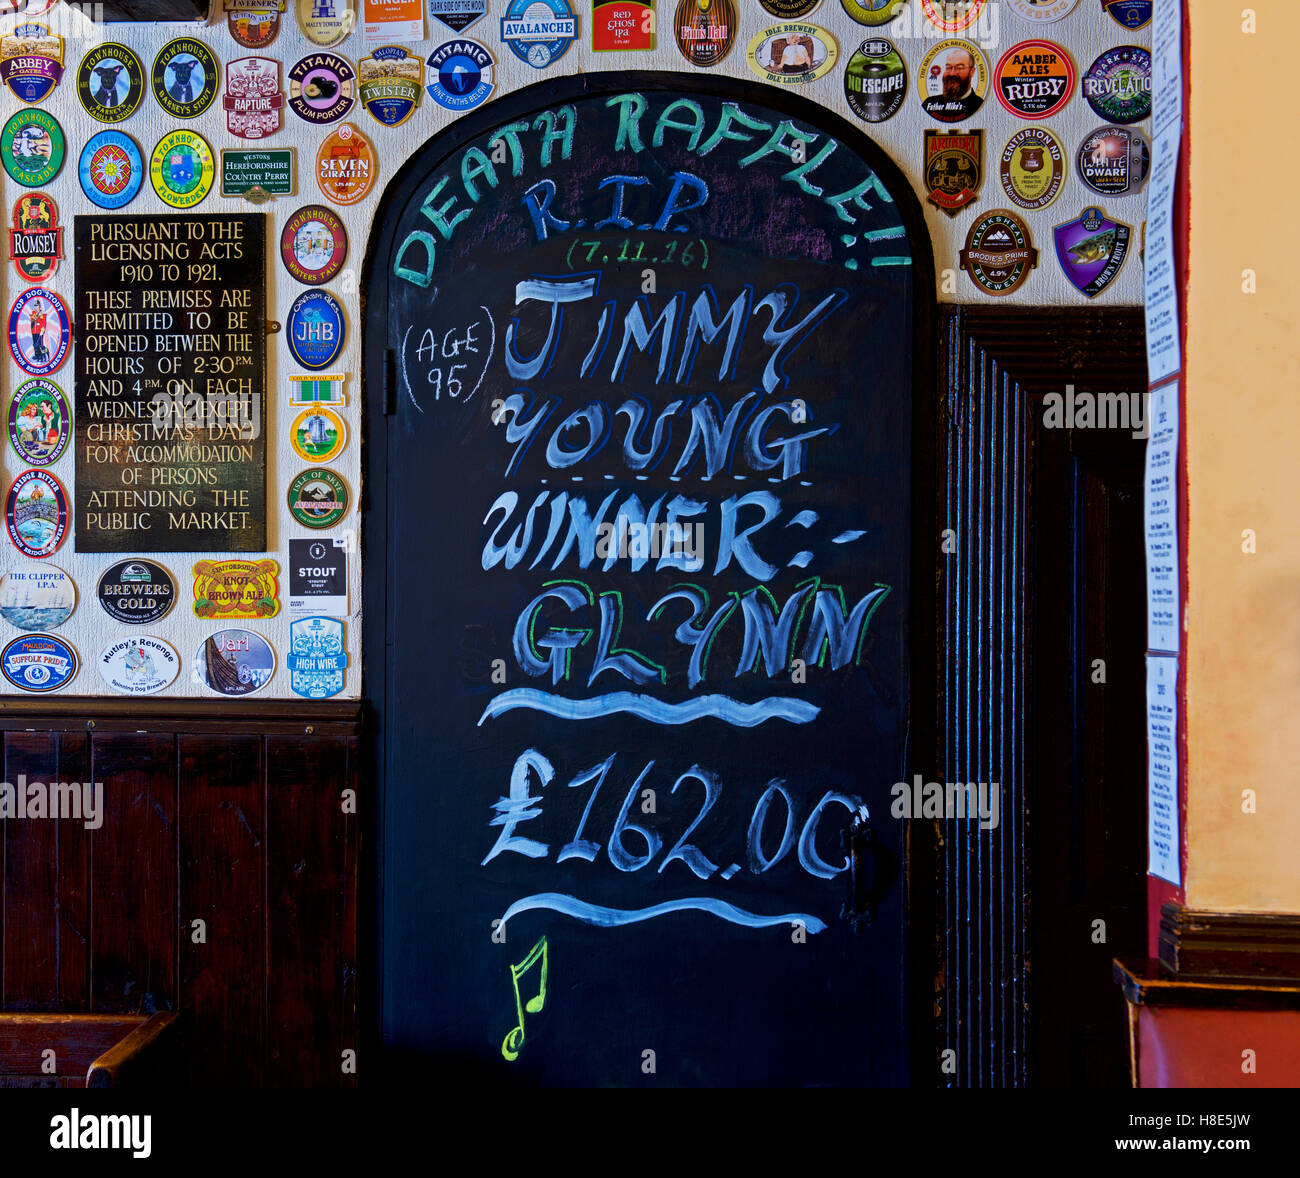 Interior of pub, with blackboard: Death Raffle, with locals betting on which celebrity dies next, England UK Stock Photo